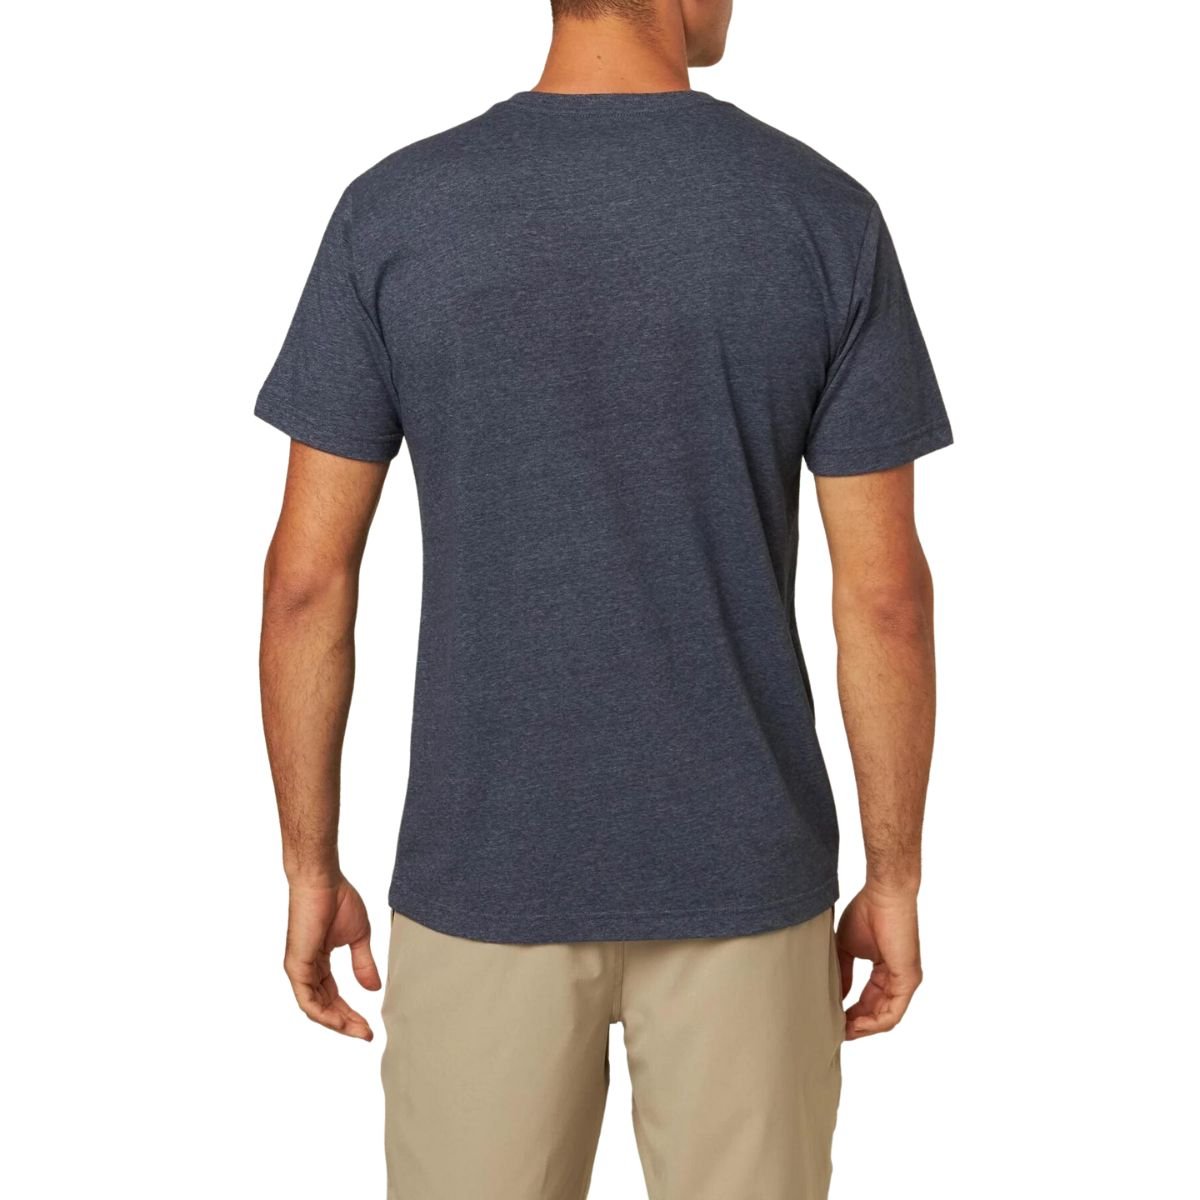 O'Neill Camp Surf Tee in Navy Heather - BoardCo